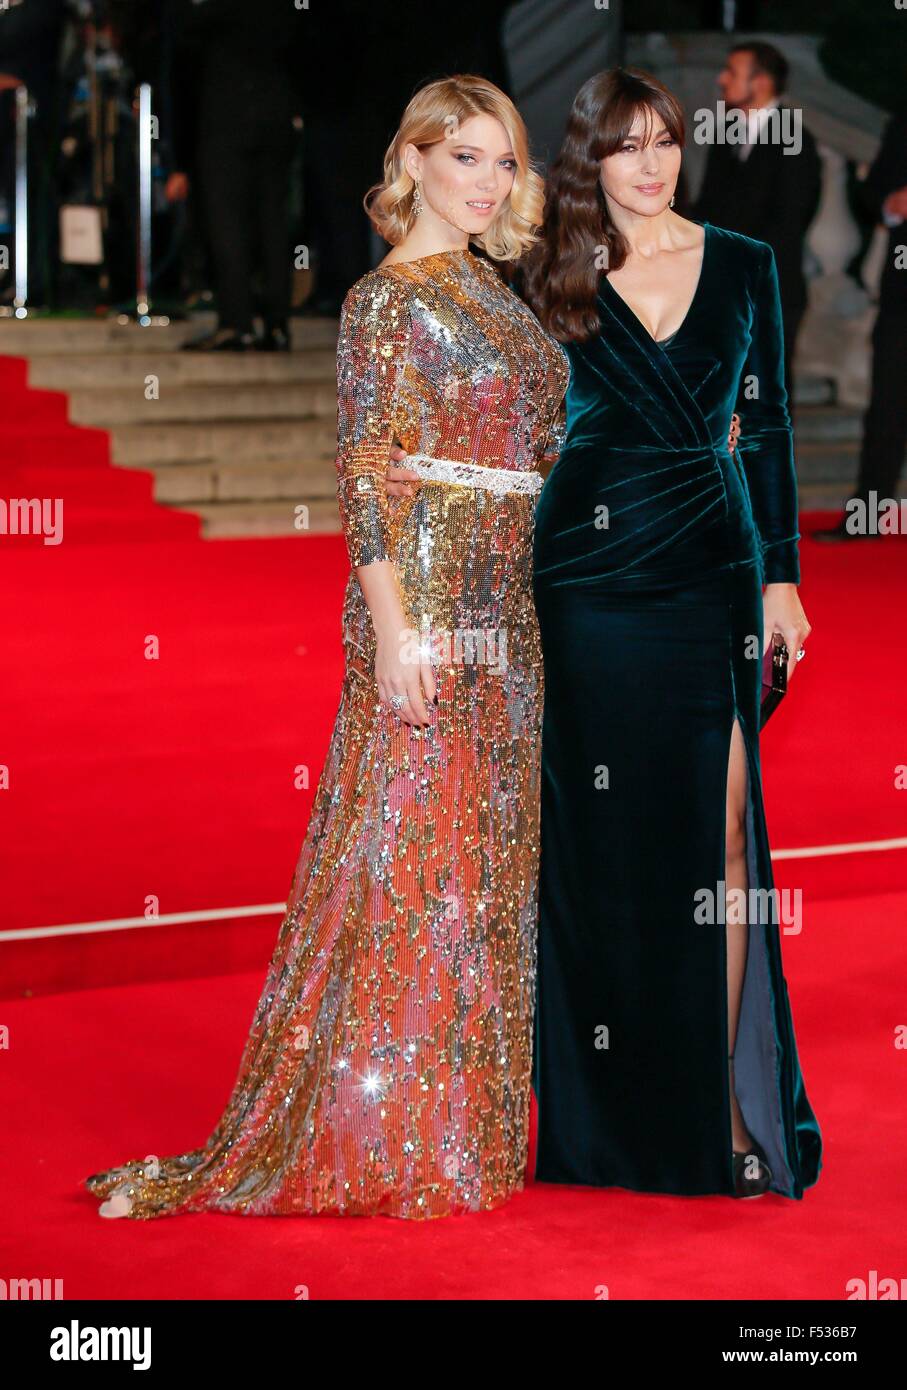 London, Britain. 26th Oct, 2015. French actress/cast member Lea Seydoux (L) and Italian actress/cast member Monica Bellucci attend the world premiere of the new James Bond film 'Spectre' at the Royal Albert Hall in London, Britain, 26 October 2015. Spectre is the 24th official James Bond film and is released in the United Kingdom on 26 October. Photo: Hubert Boesl/dpa - NO WIRE SERVICE -/dpa/Alamy Live News Stock Photo